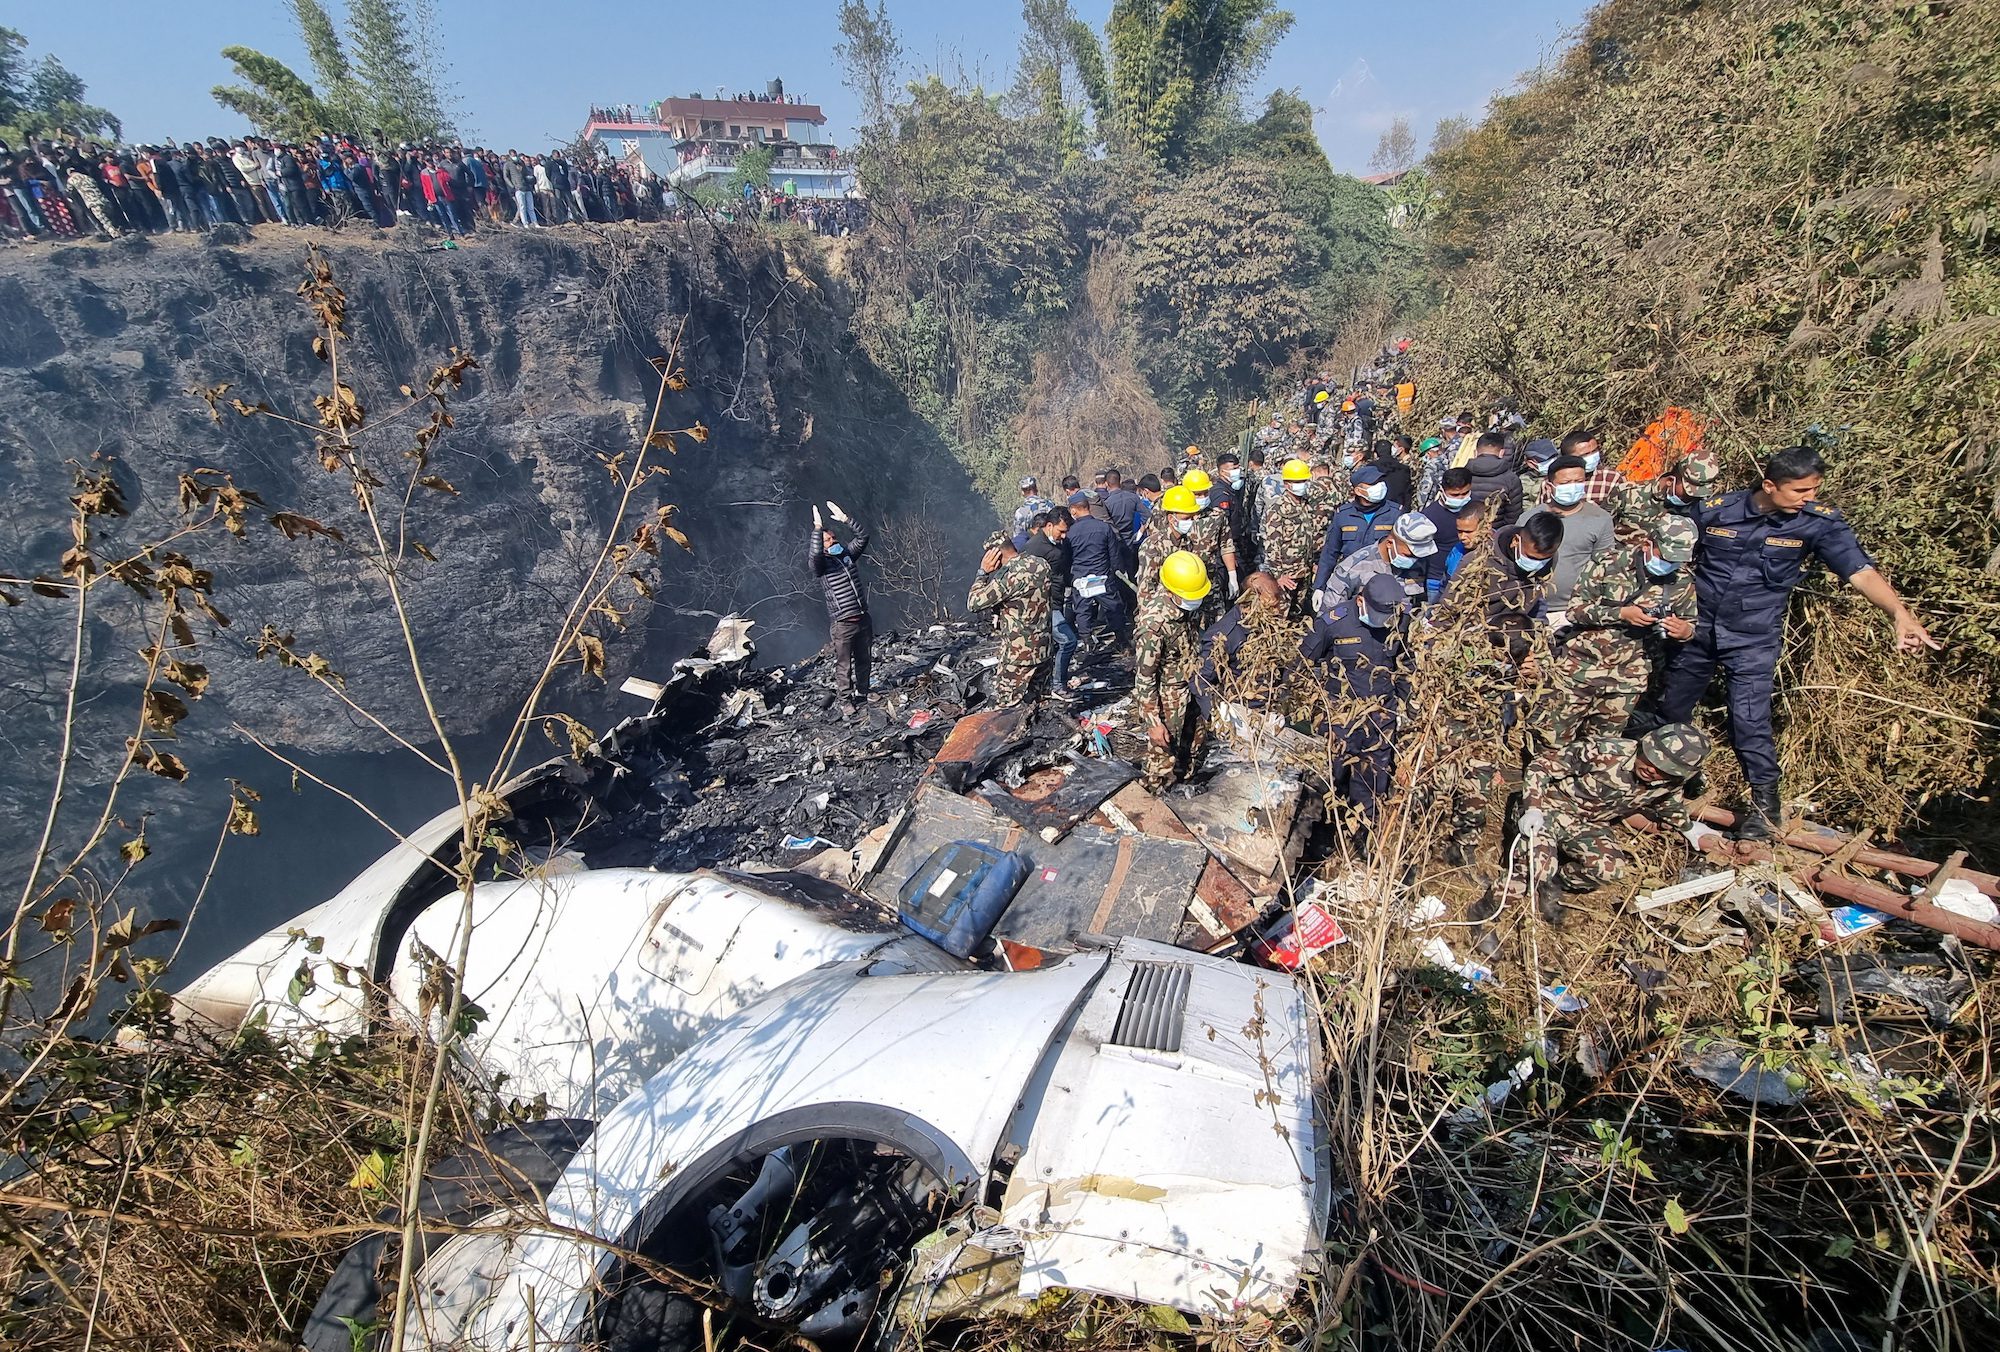 Rescue teams work to retrieve bodies at the crash site of an aircraft carrying 72 people in Pokhara in western Nepal January 15, 2023. Bijay Neupane/Handout via REUTERS